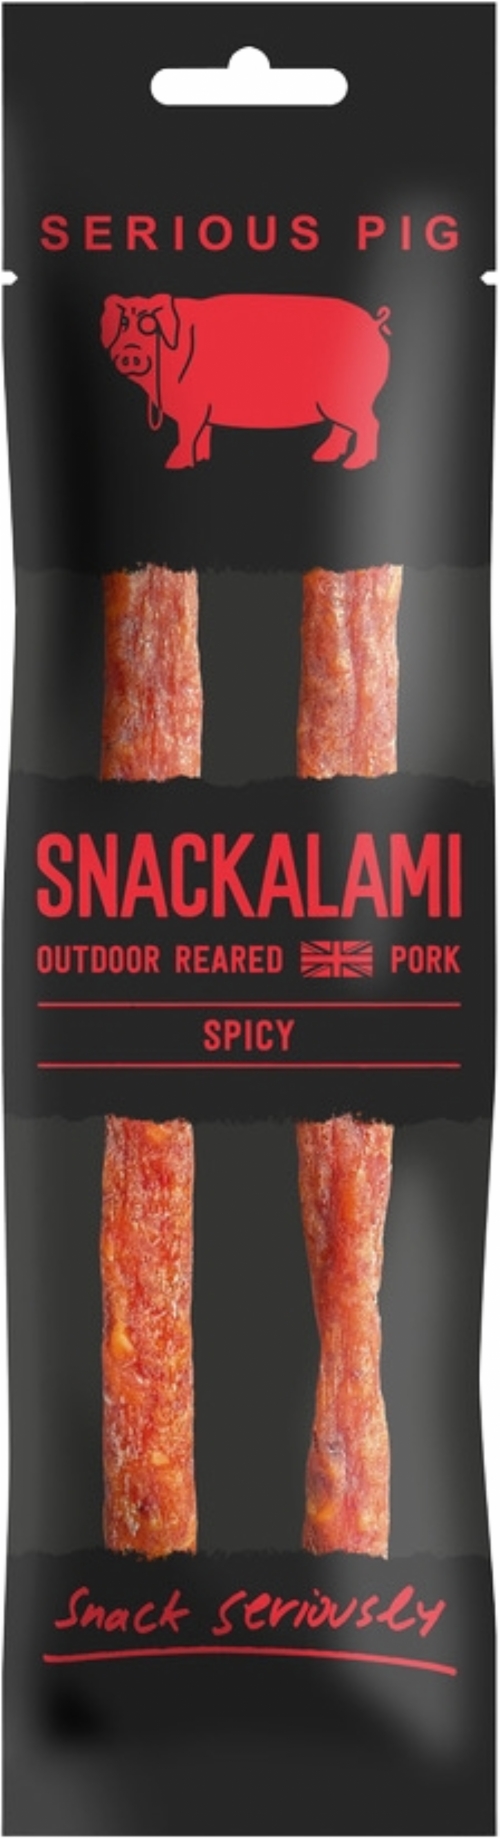 SERIOUS PIG Snackalami - Spicy 30g